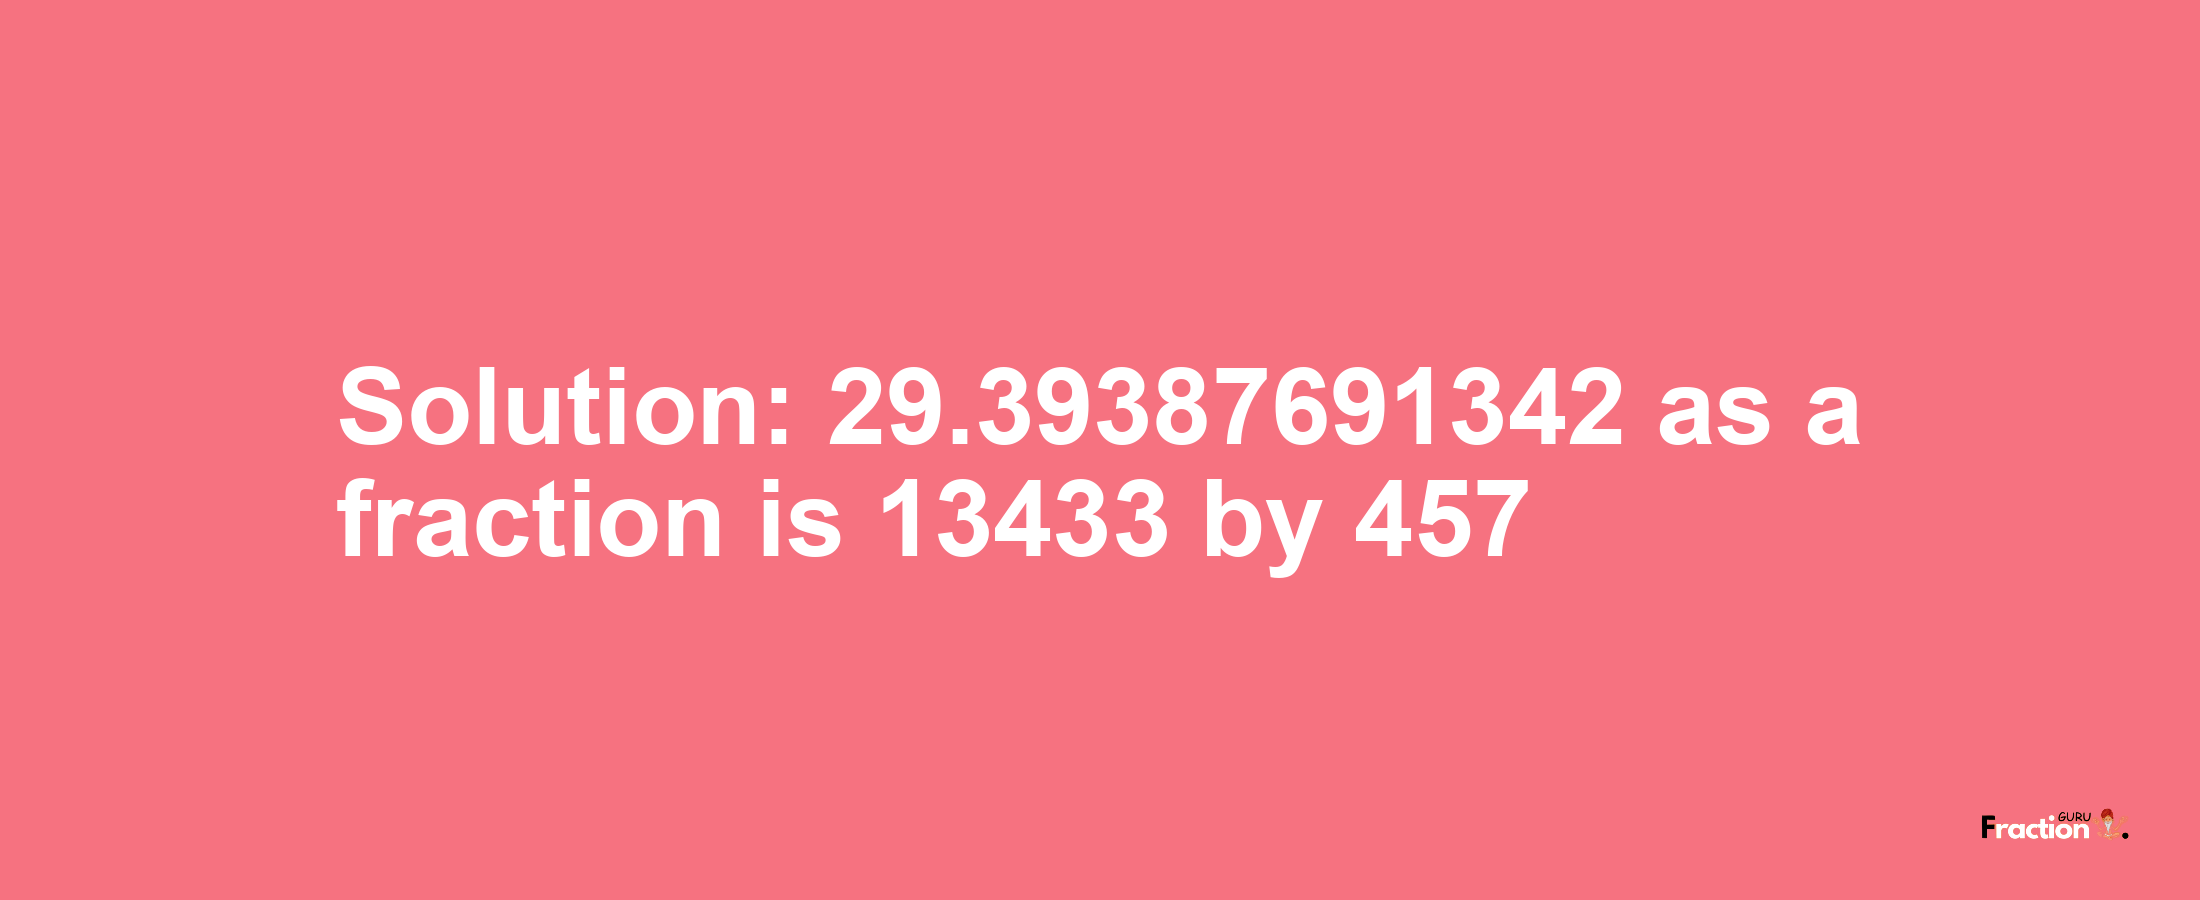 Solution:29.39387691342 as a fraction is 13433/457